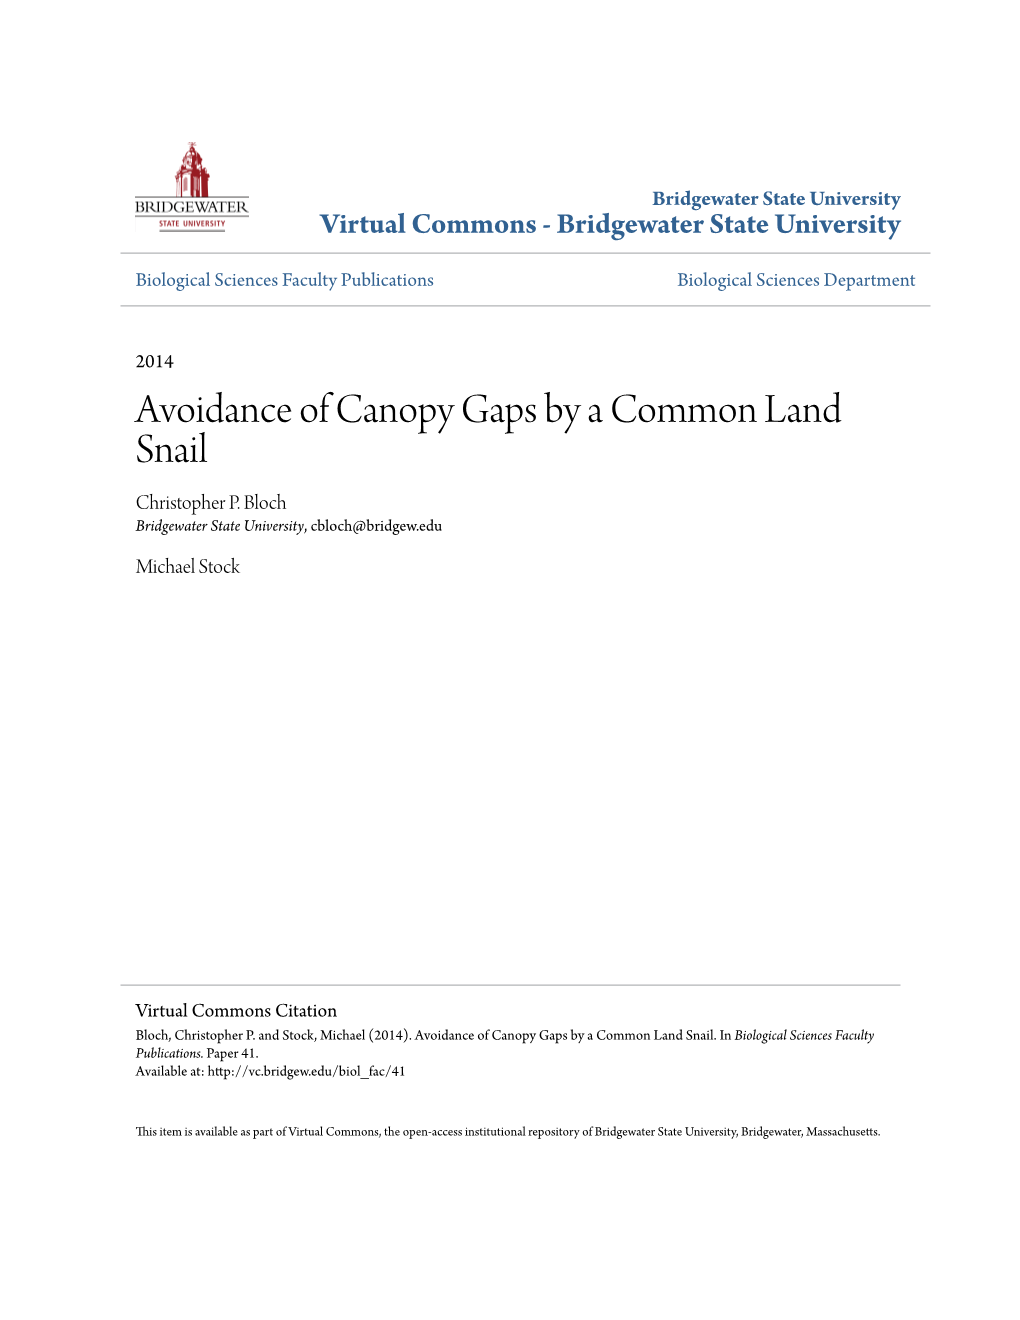 Avoidance of Canopy Gaps by a Common Land Snail Christopher P